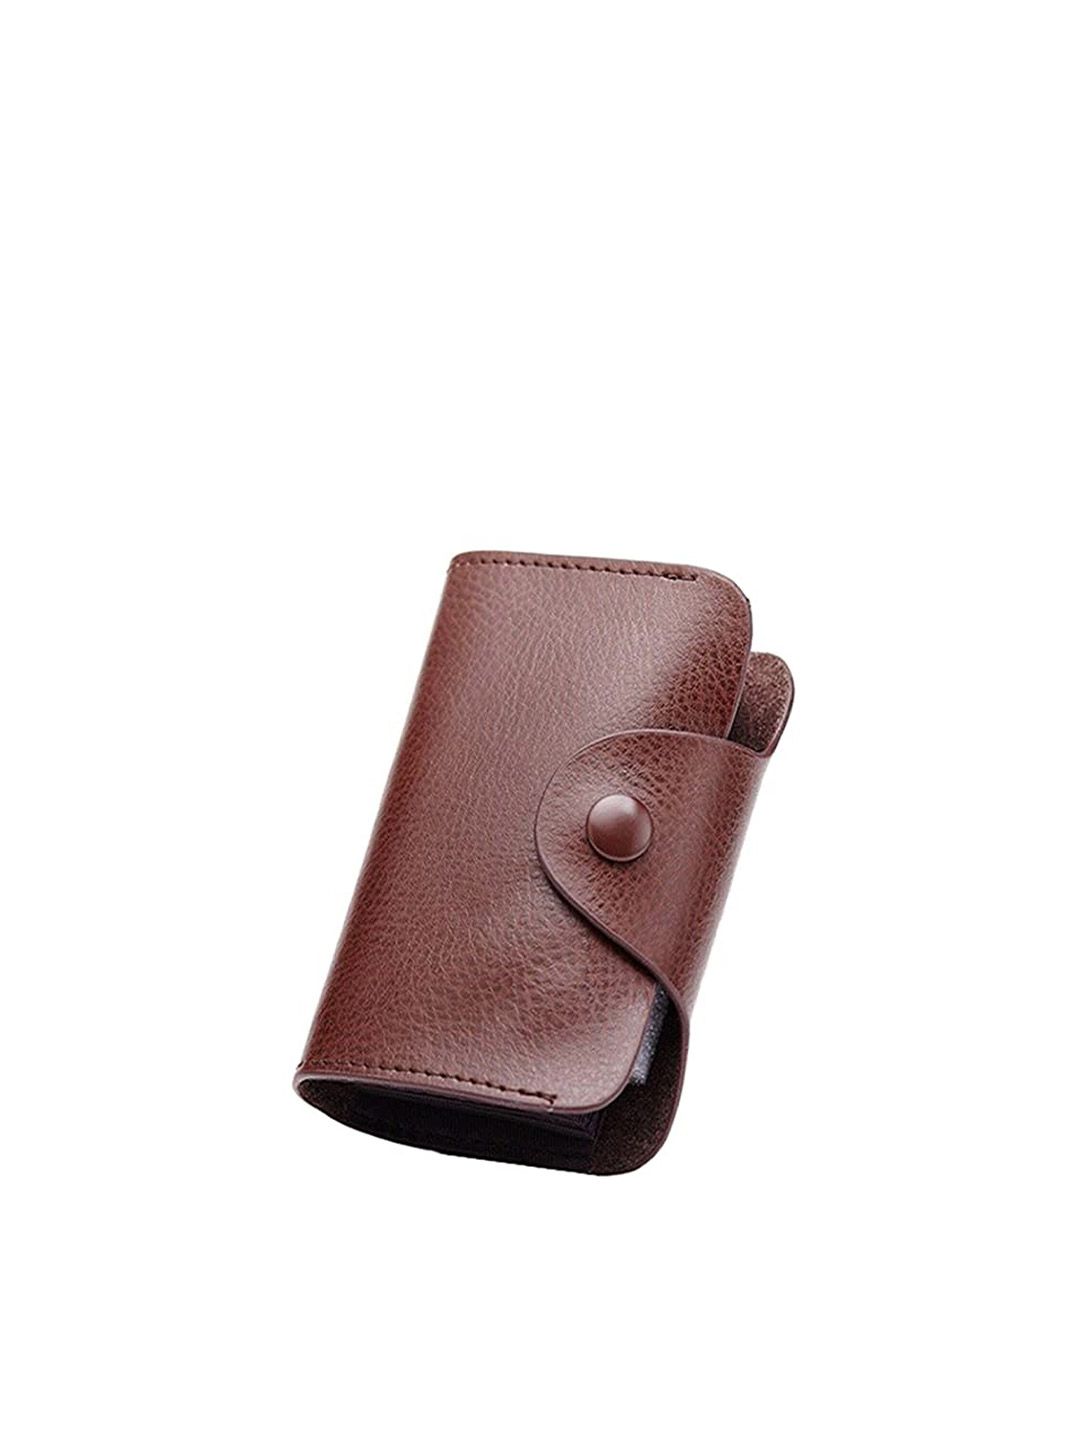 StealODeal Unisex Coffee Brown Leather Card Holder Price in India